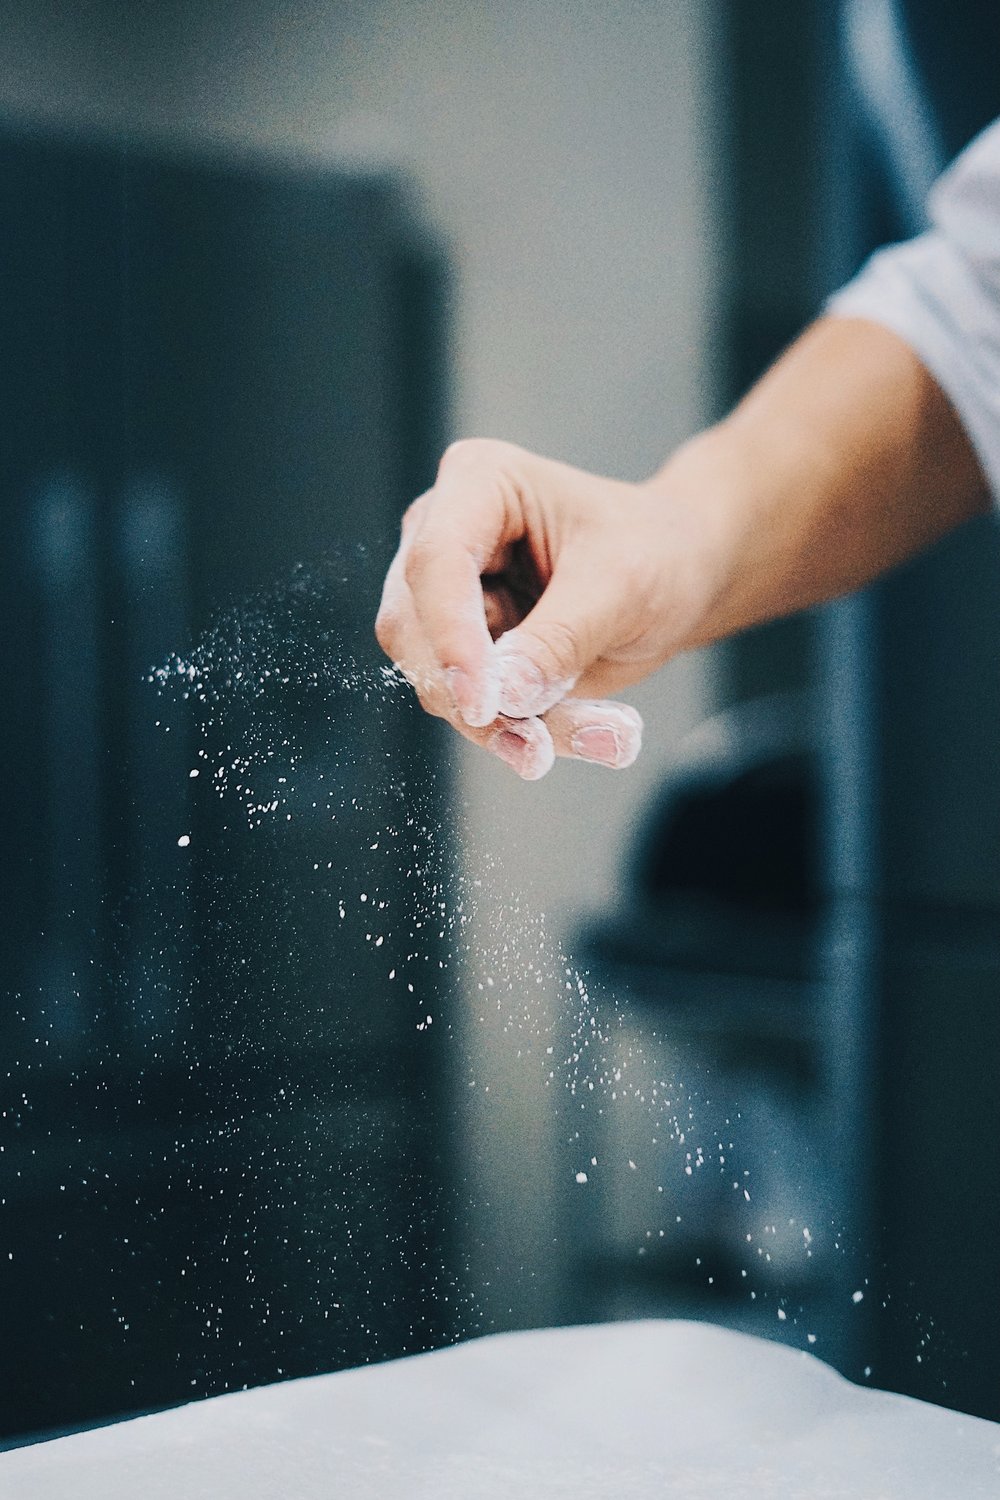 a hand sprinkling flour while cooking